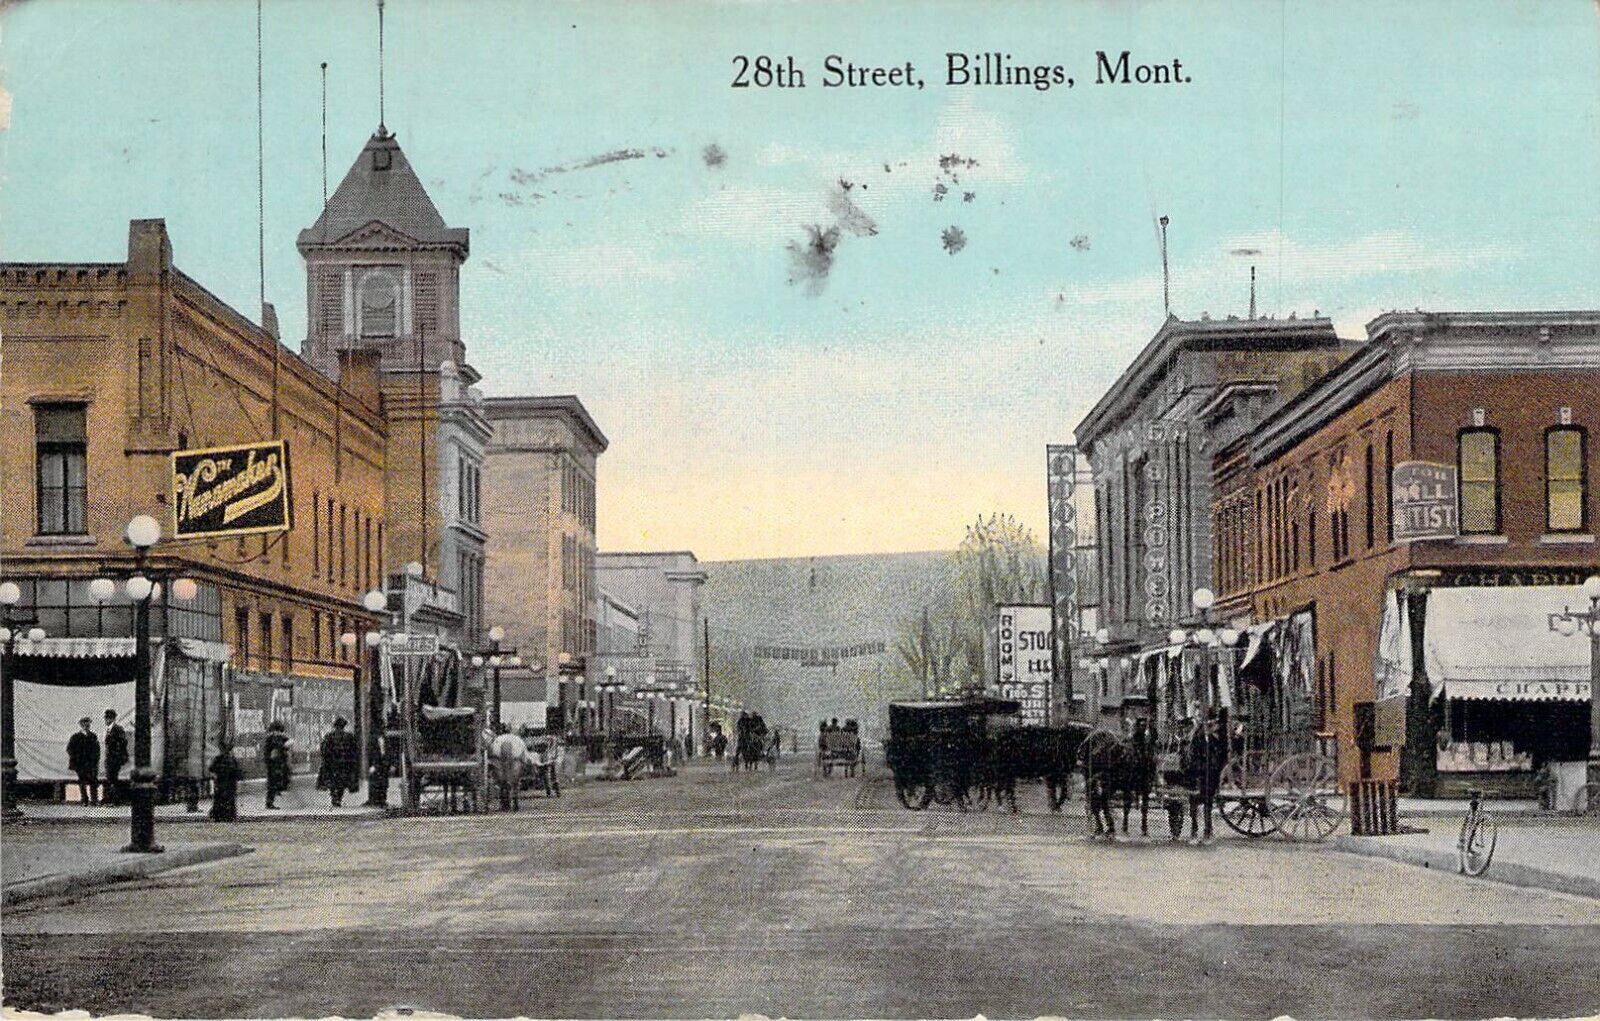 28th Street, Billings, Montana, Posted 1915